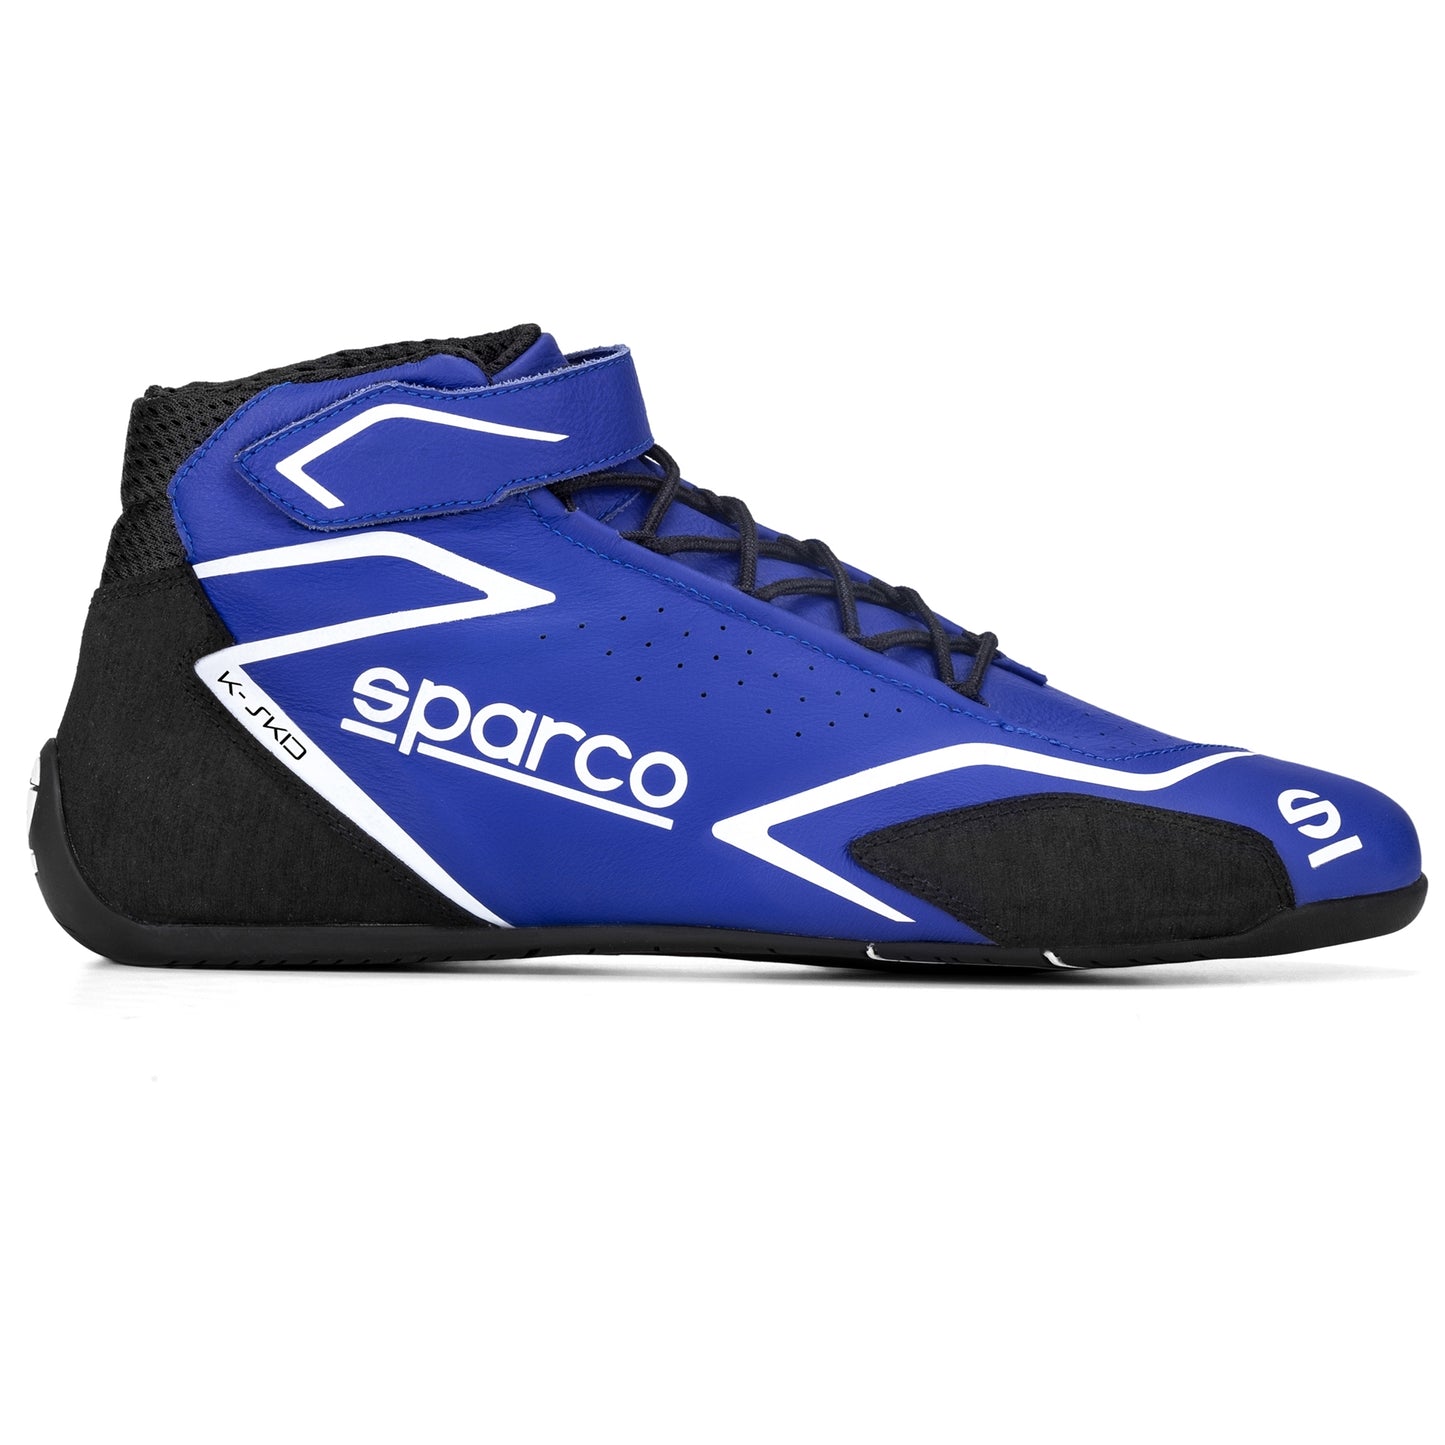 Sparco K-Skid Racing Shoes